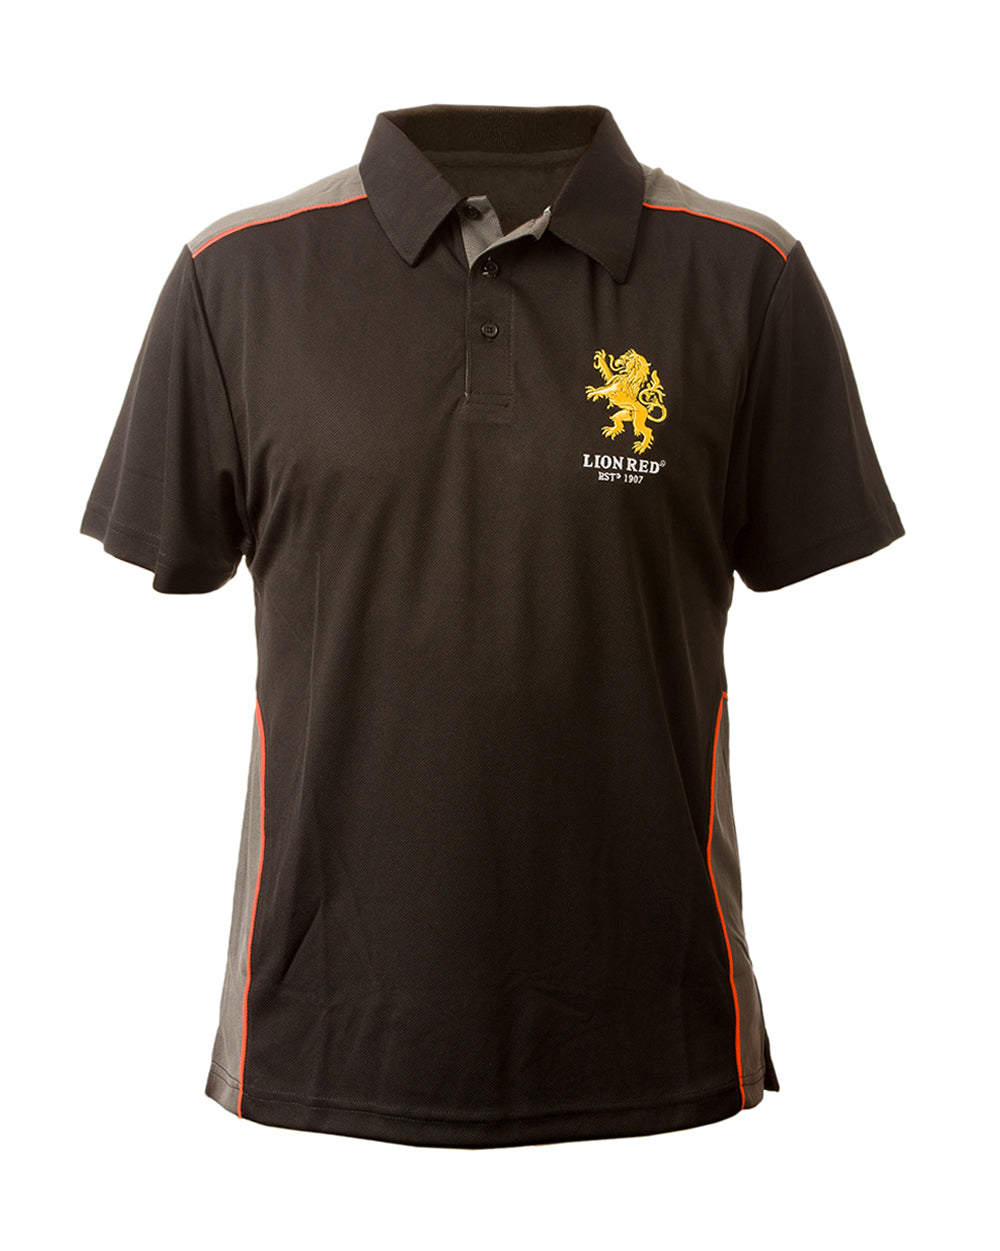 Lion Red Drifit Polo -  Beer Gear Apparel & Merchandise - Speights - Lion Red - VB - Tokyo Dy merch